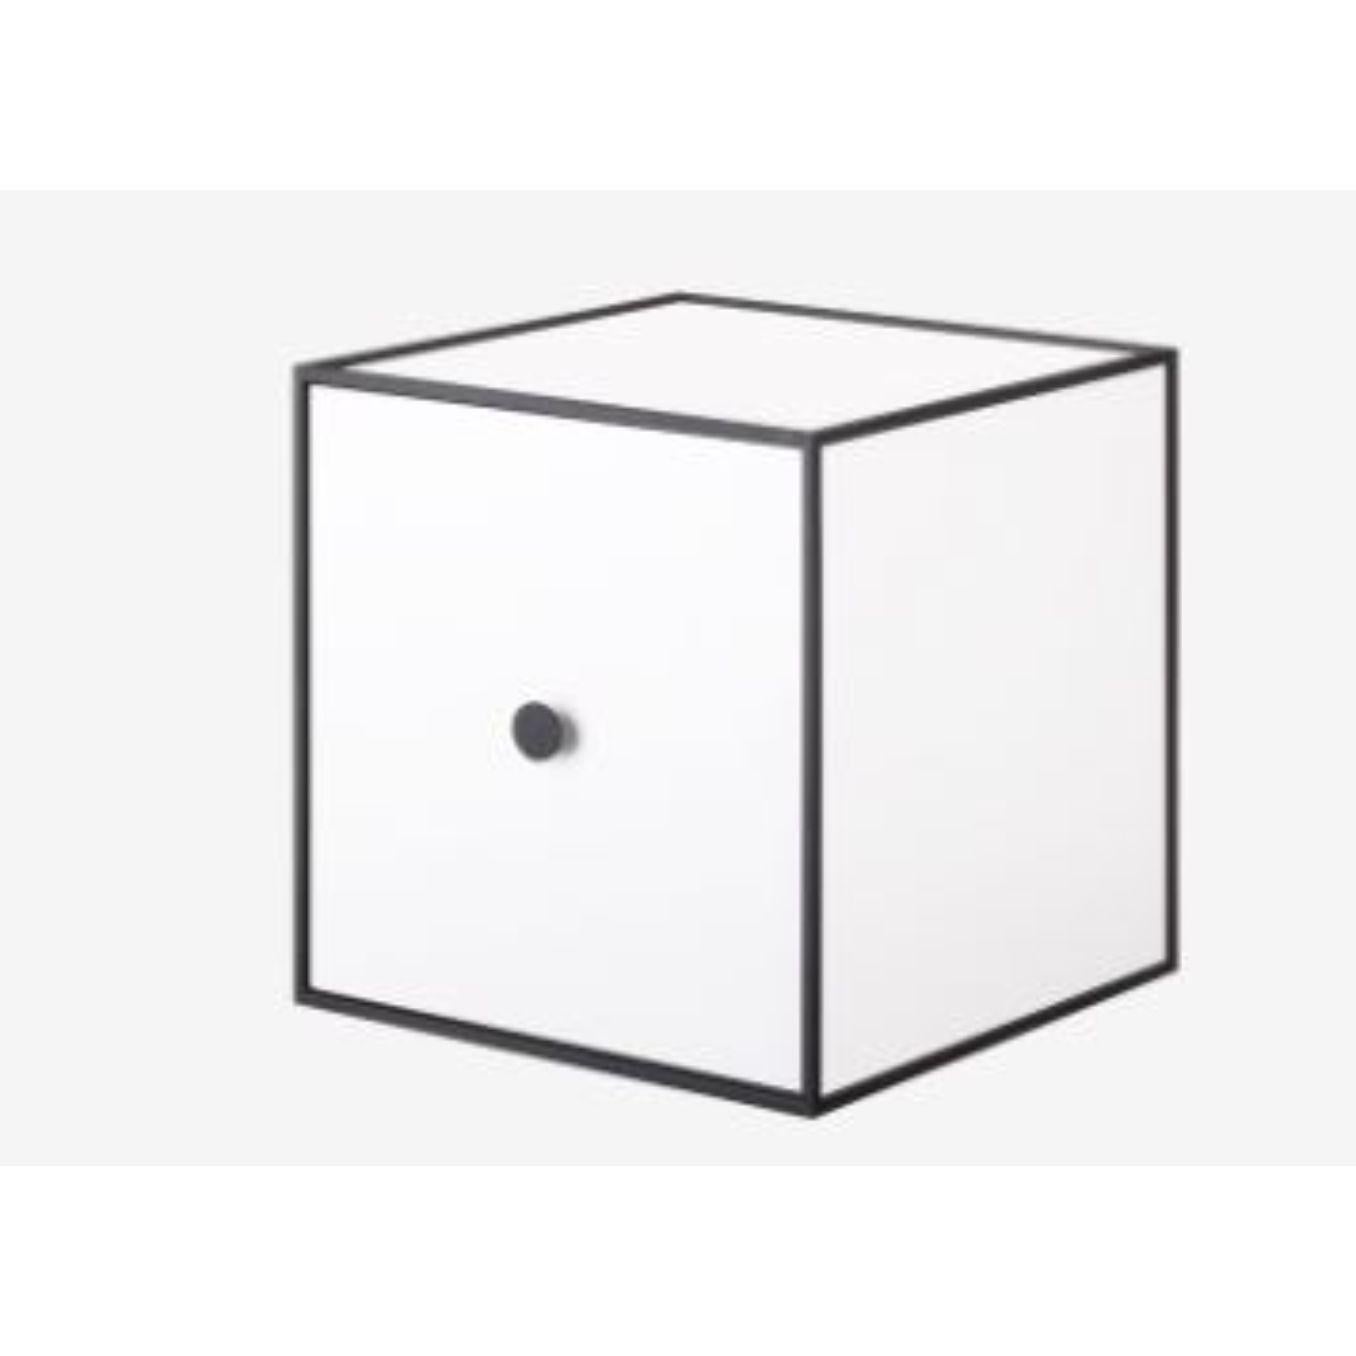 28 white frame box with door by Lassen
Dimensions: W 28 x D 28 x H 28 cm 
Materials: Finér, Melamin, Melamin, Melamine, Metal, Veneer
Also available in different colors and dimensions. 

By Lassen is a Danish design brand focused on iconic